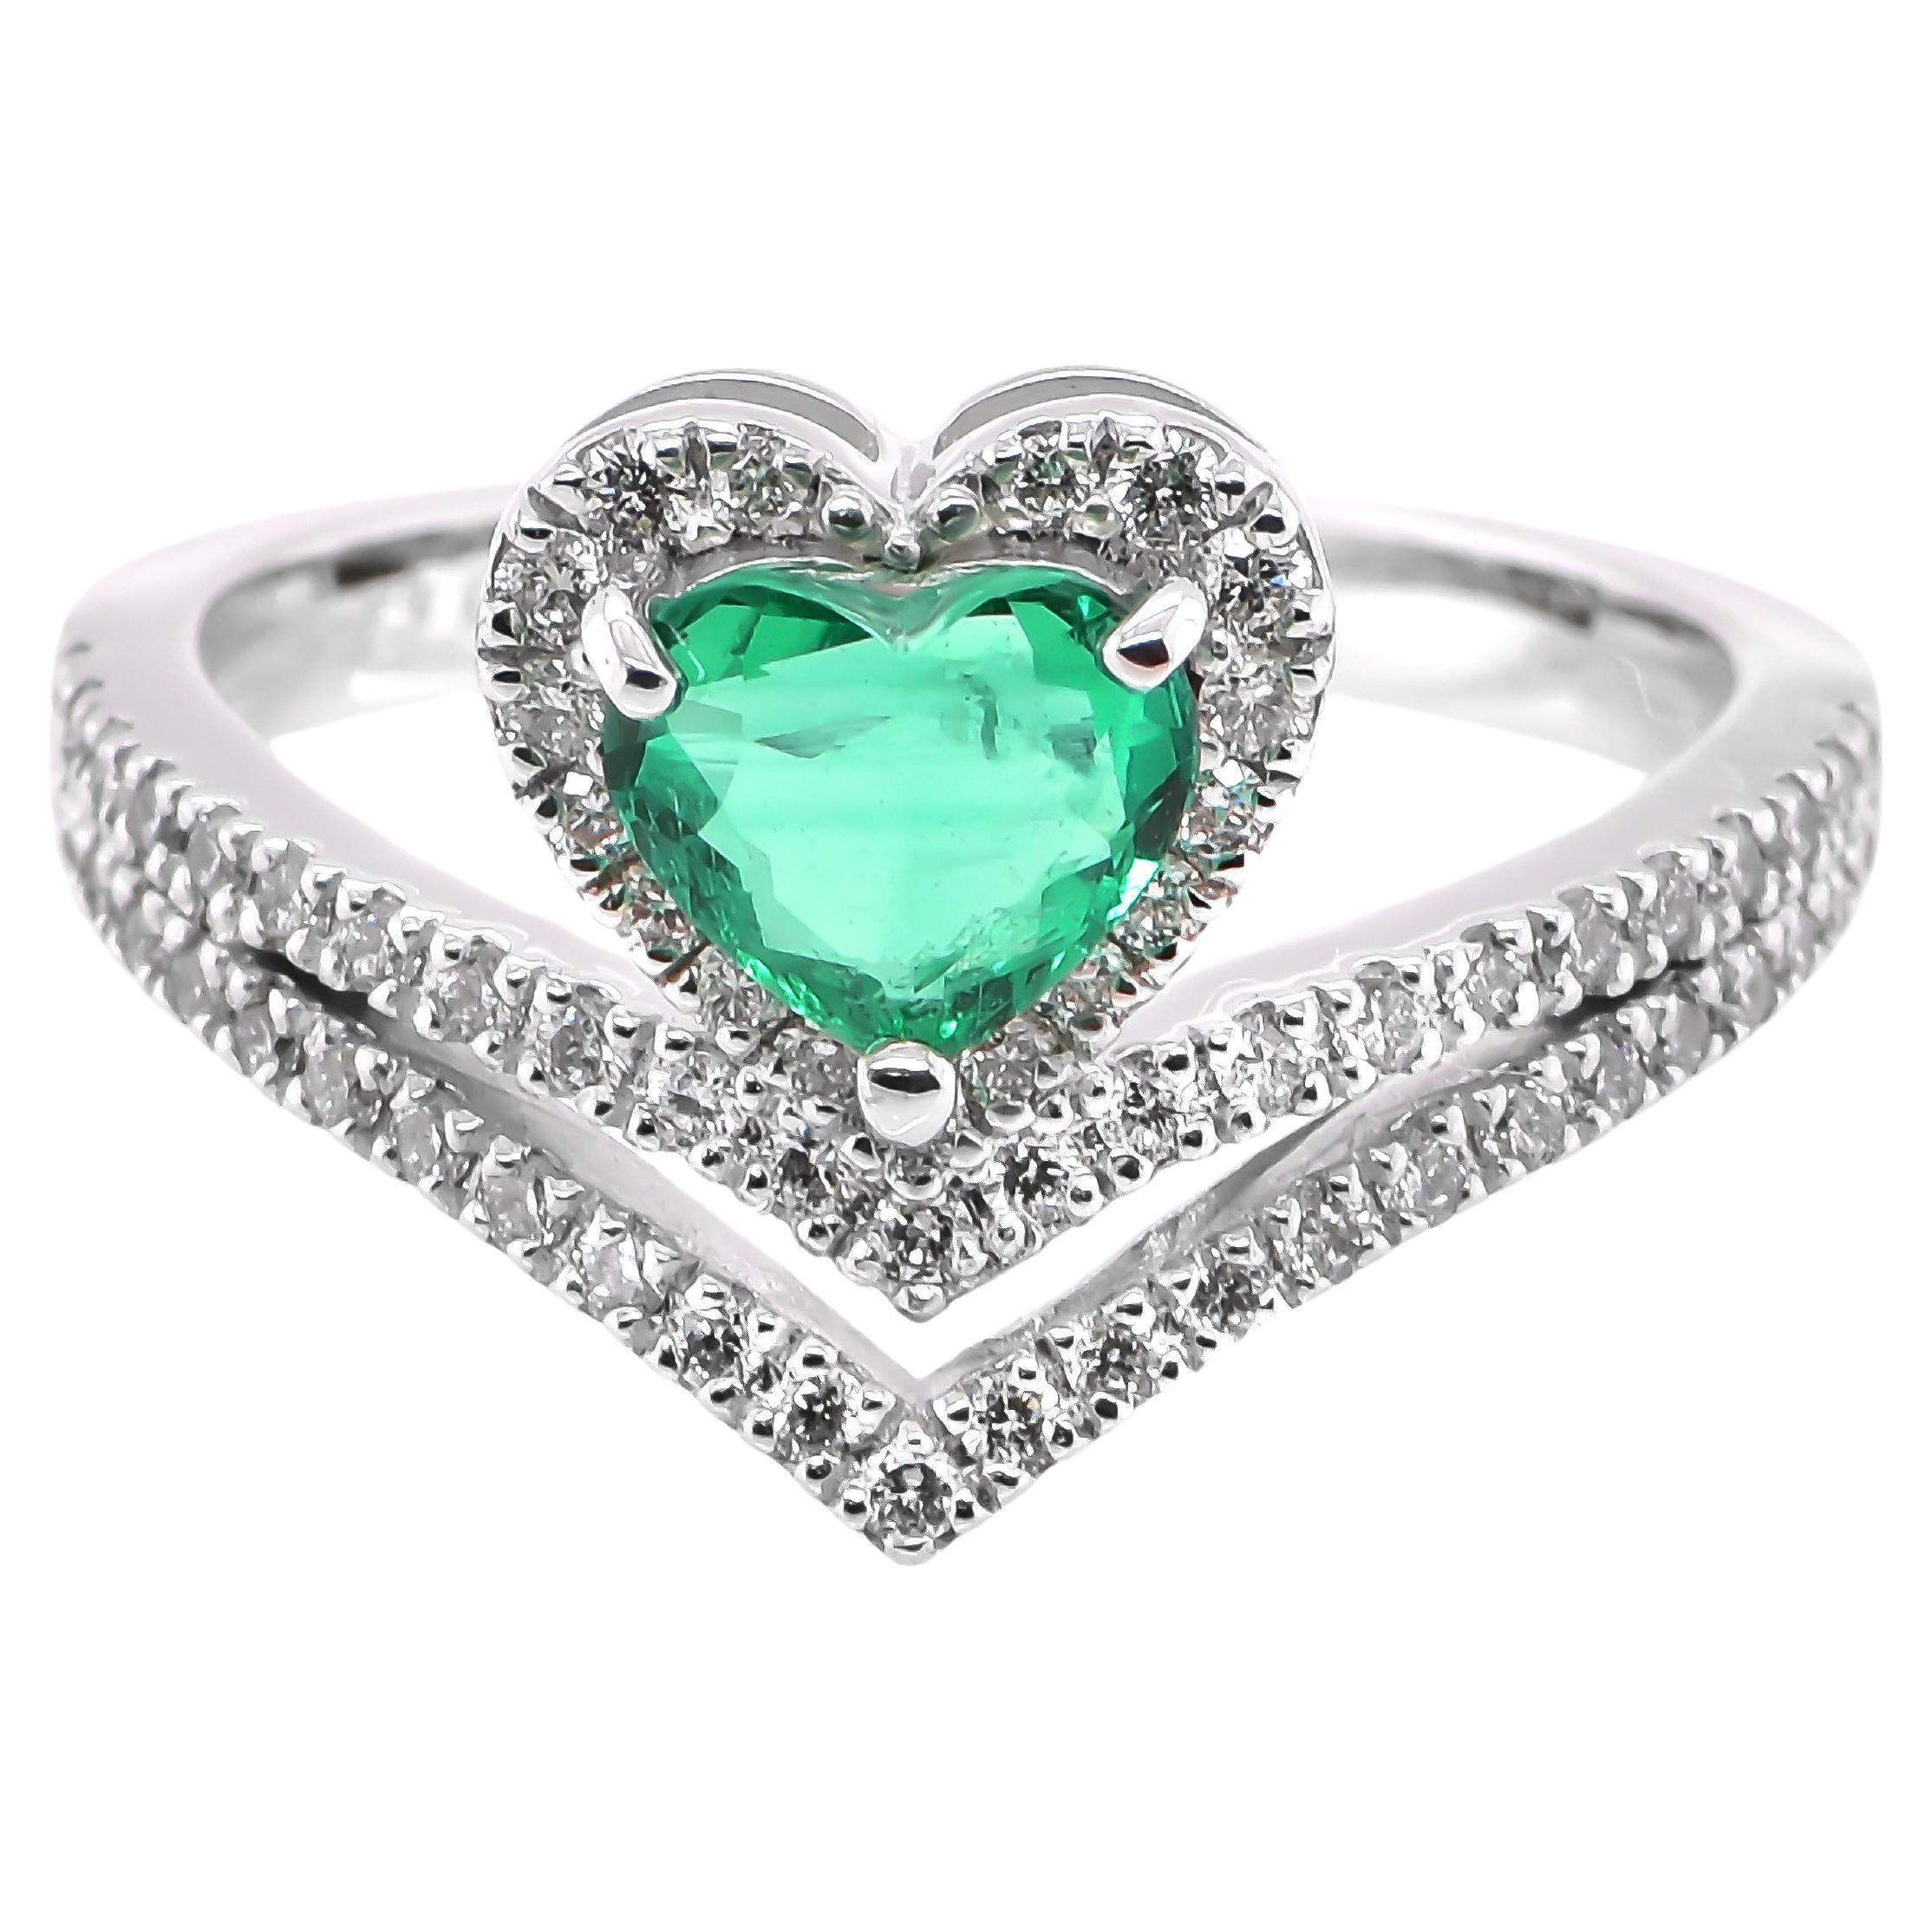 0.65 Carat Emerald and Diamond Tiara Cocktail Ring Made in Platinum For Sale